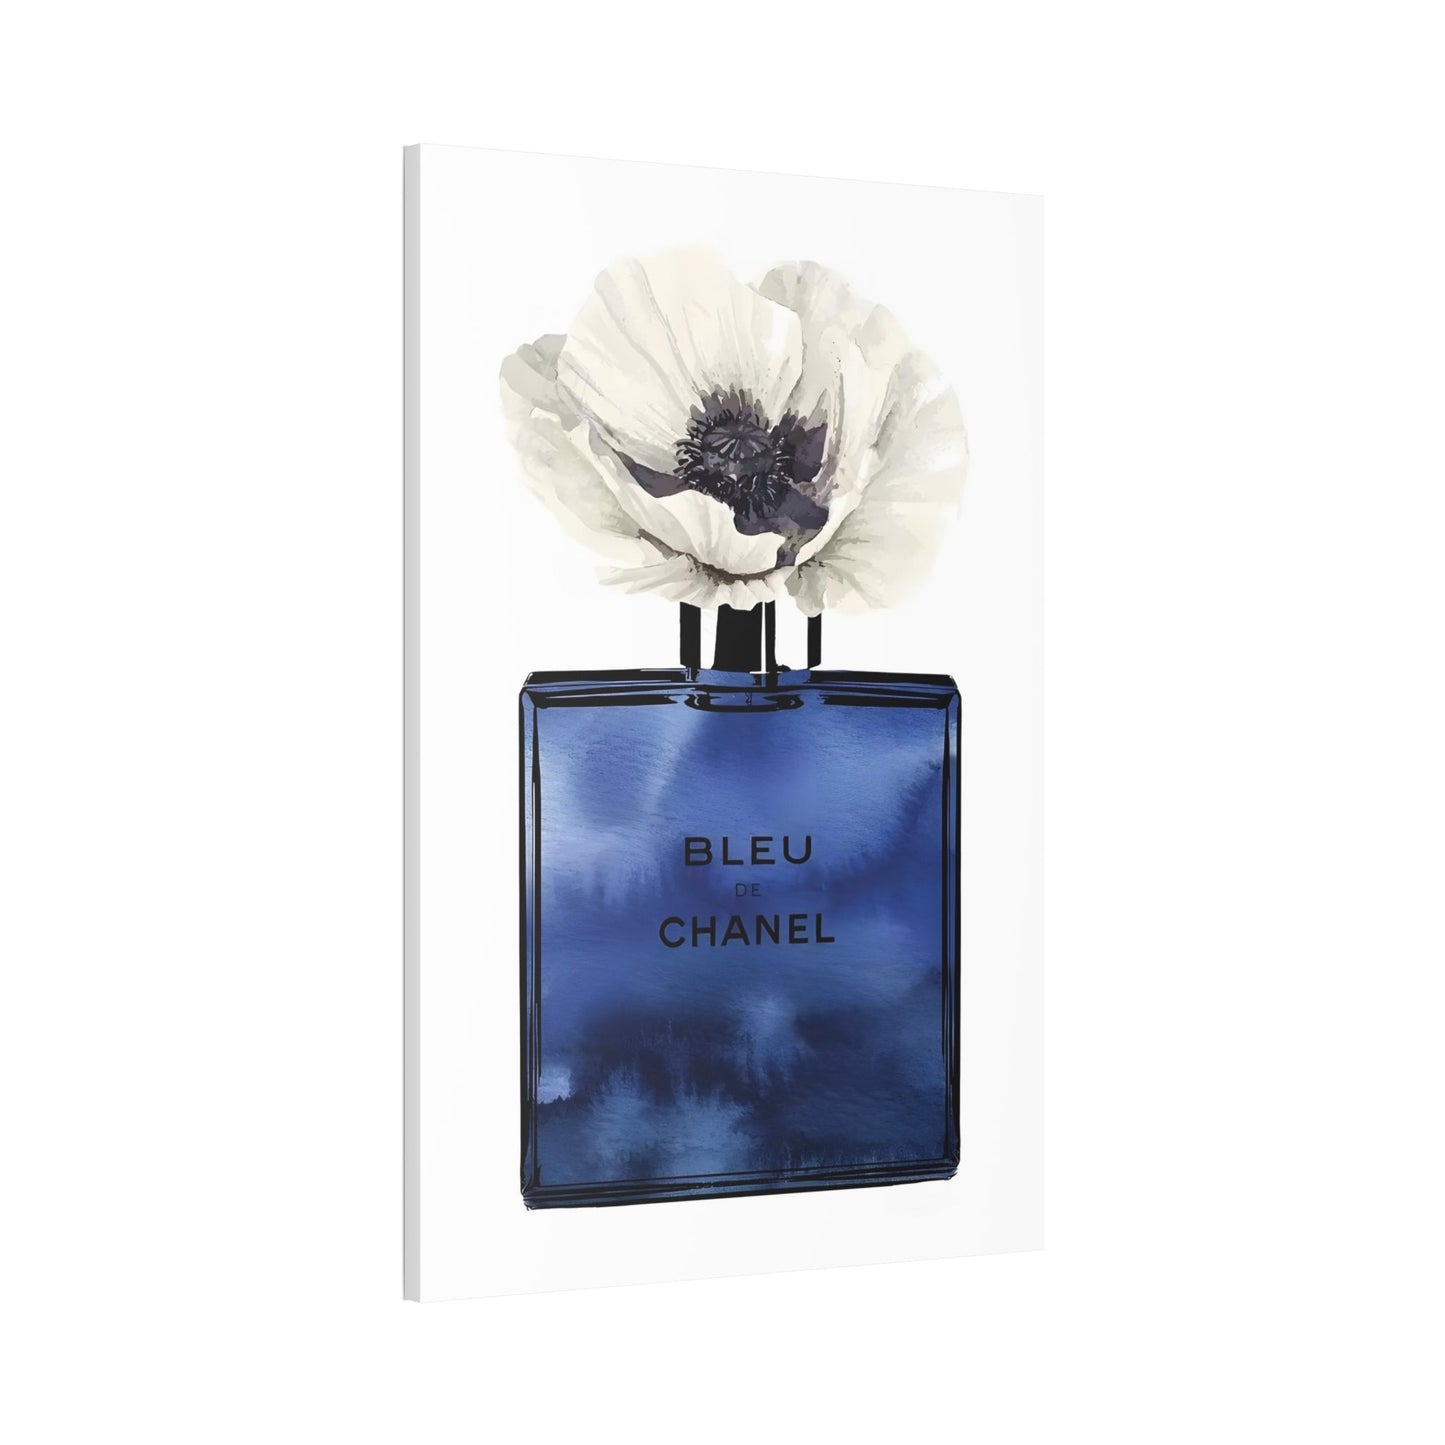 Chanel's Timeless Beauty: Luxurious Print on Framed Canvas